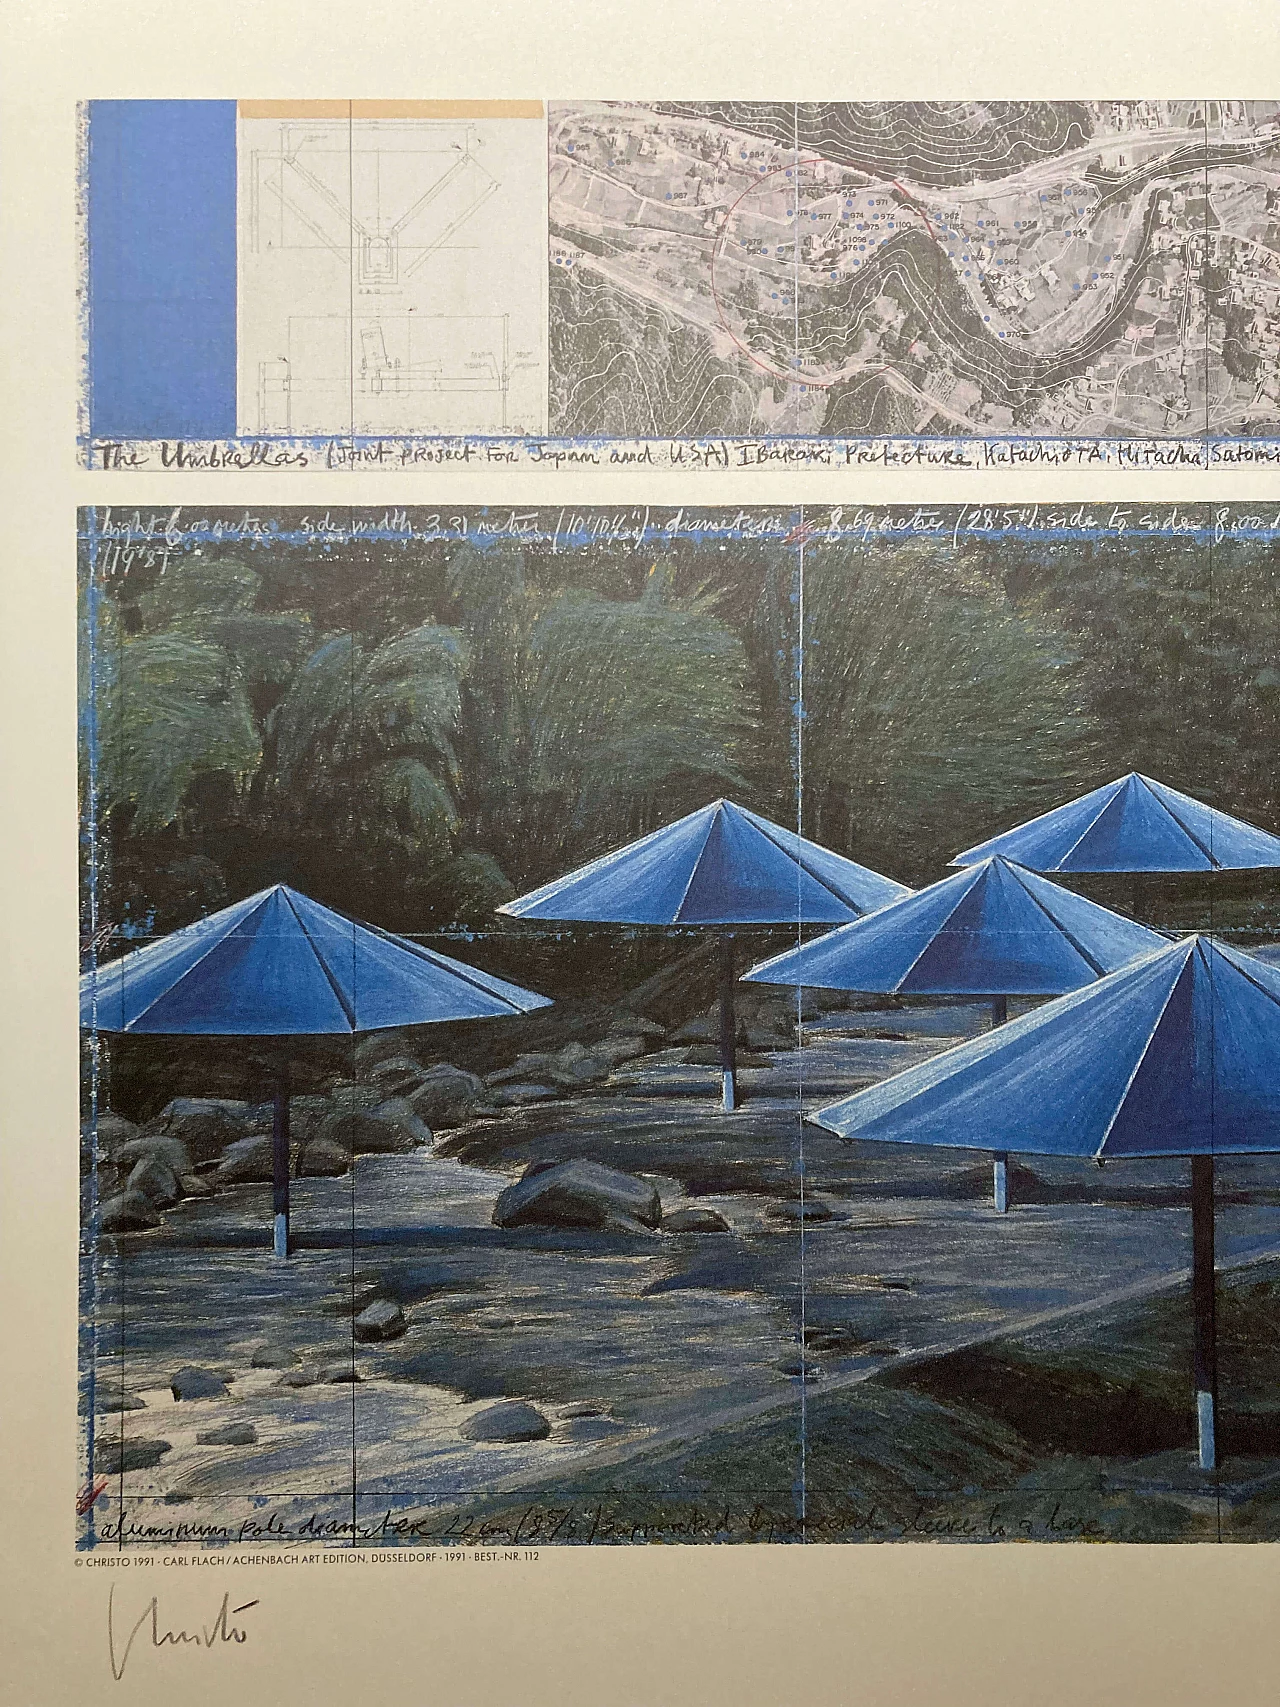 Christo, The Umbrellas - Joint Project for Japan and USA, litografia, 1991 6